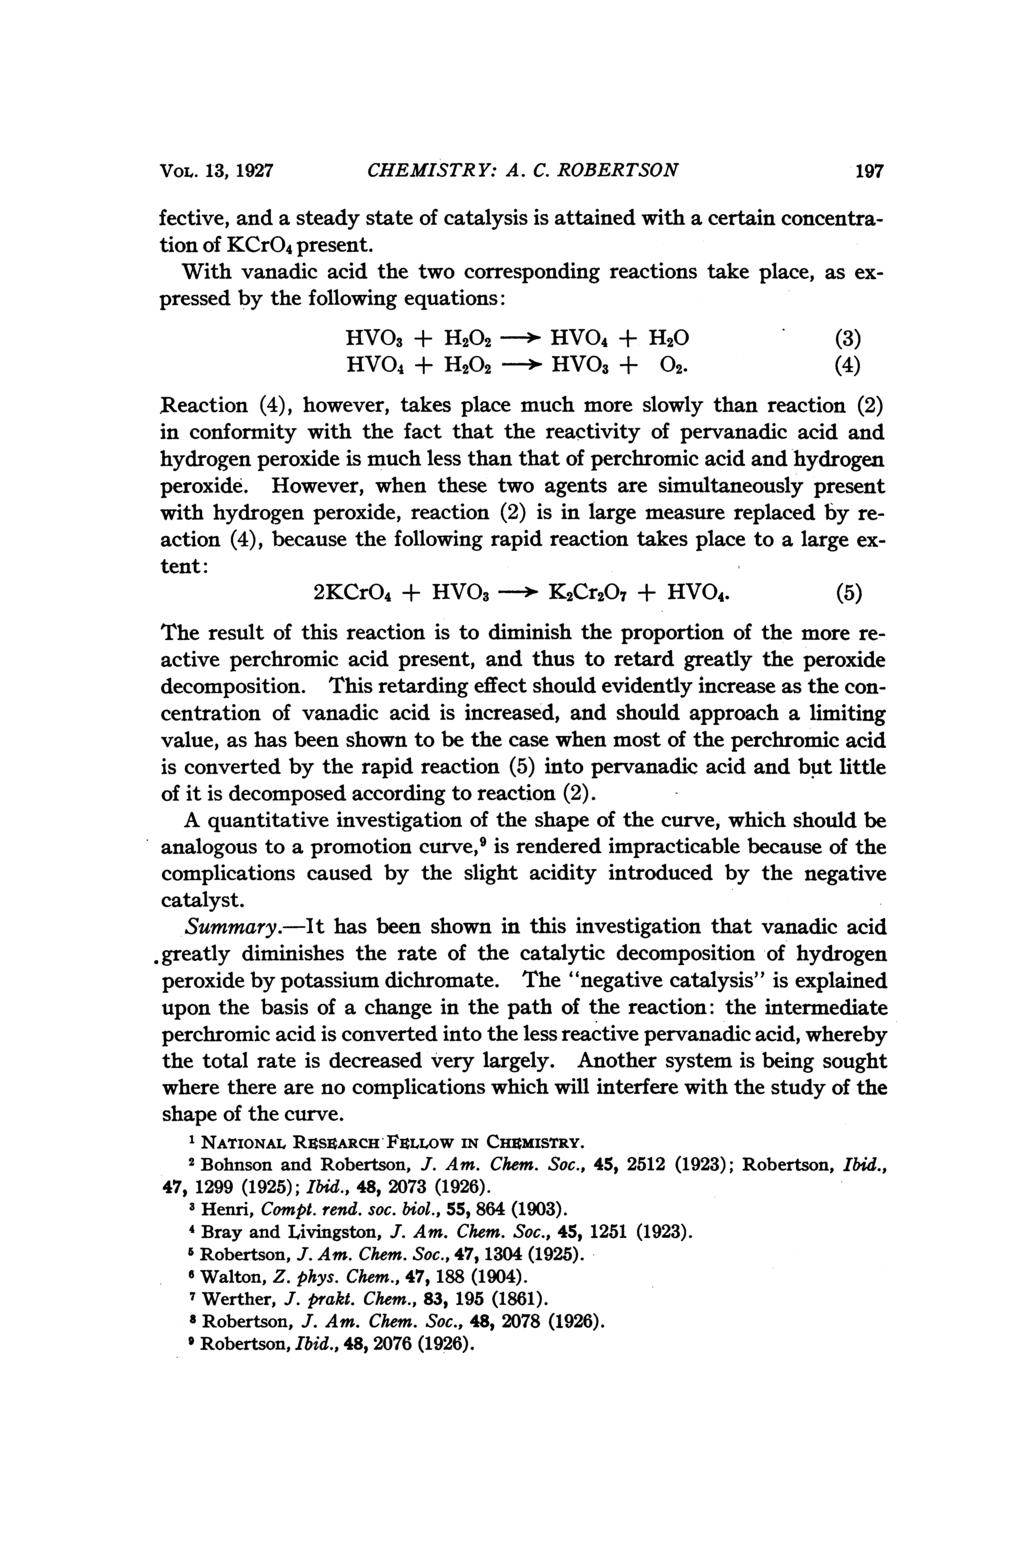 VOL,. 13, 1927 CHEMISTRY: A. C. ROBERTSON 1197 fective, and a steady state of catalysis is attained with a certain concentration of KCrO4 present.